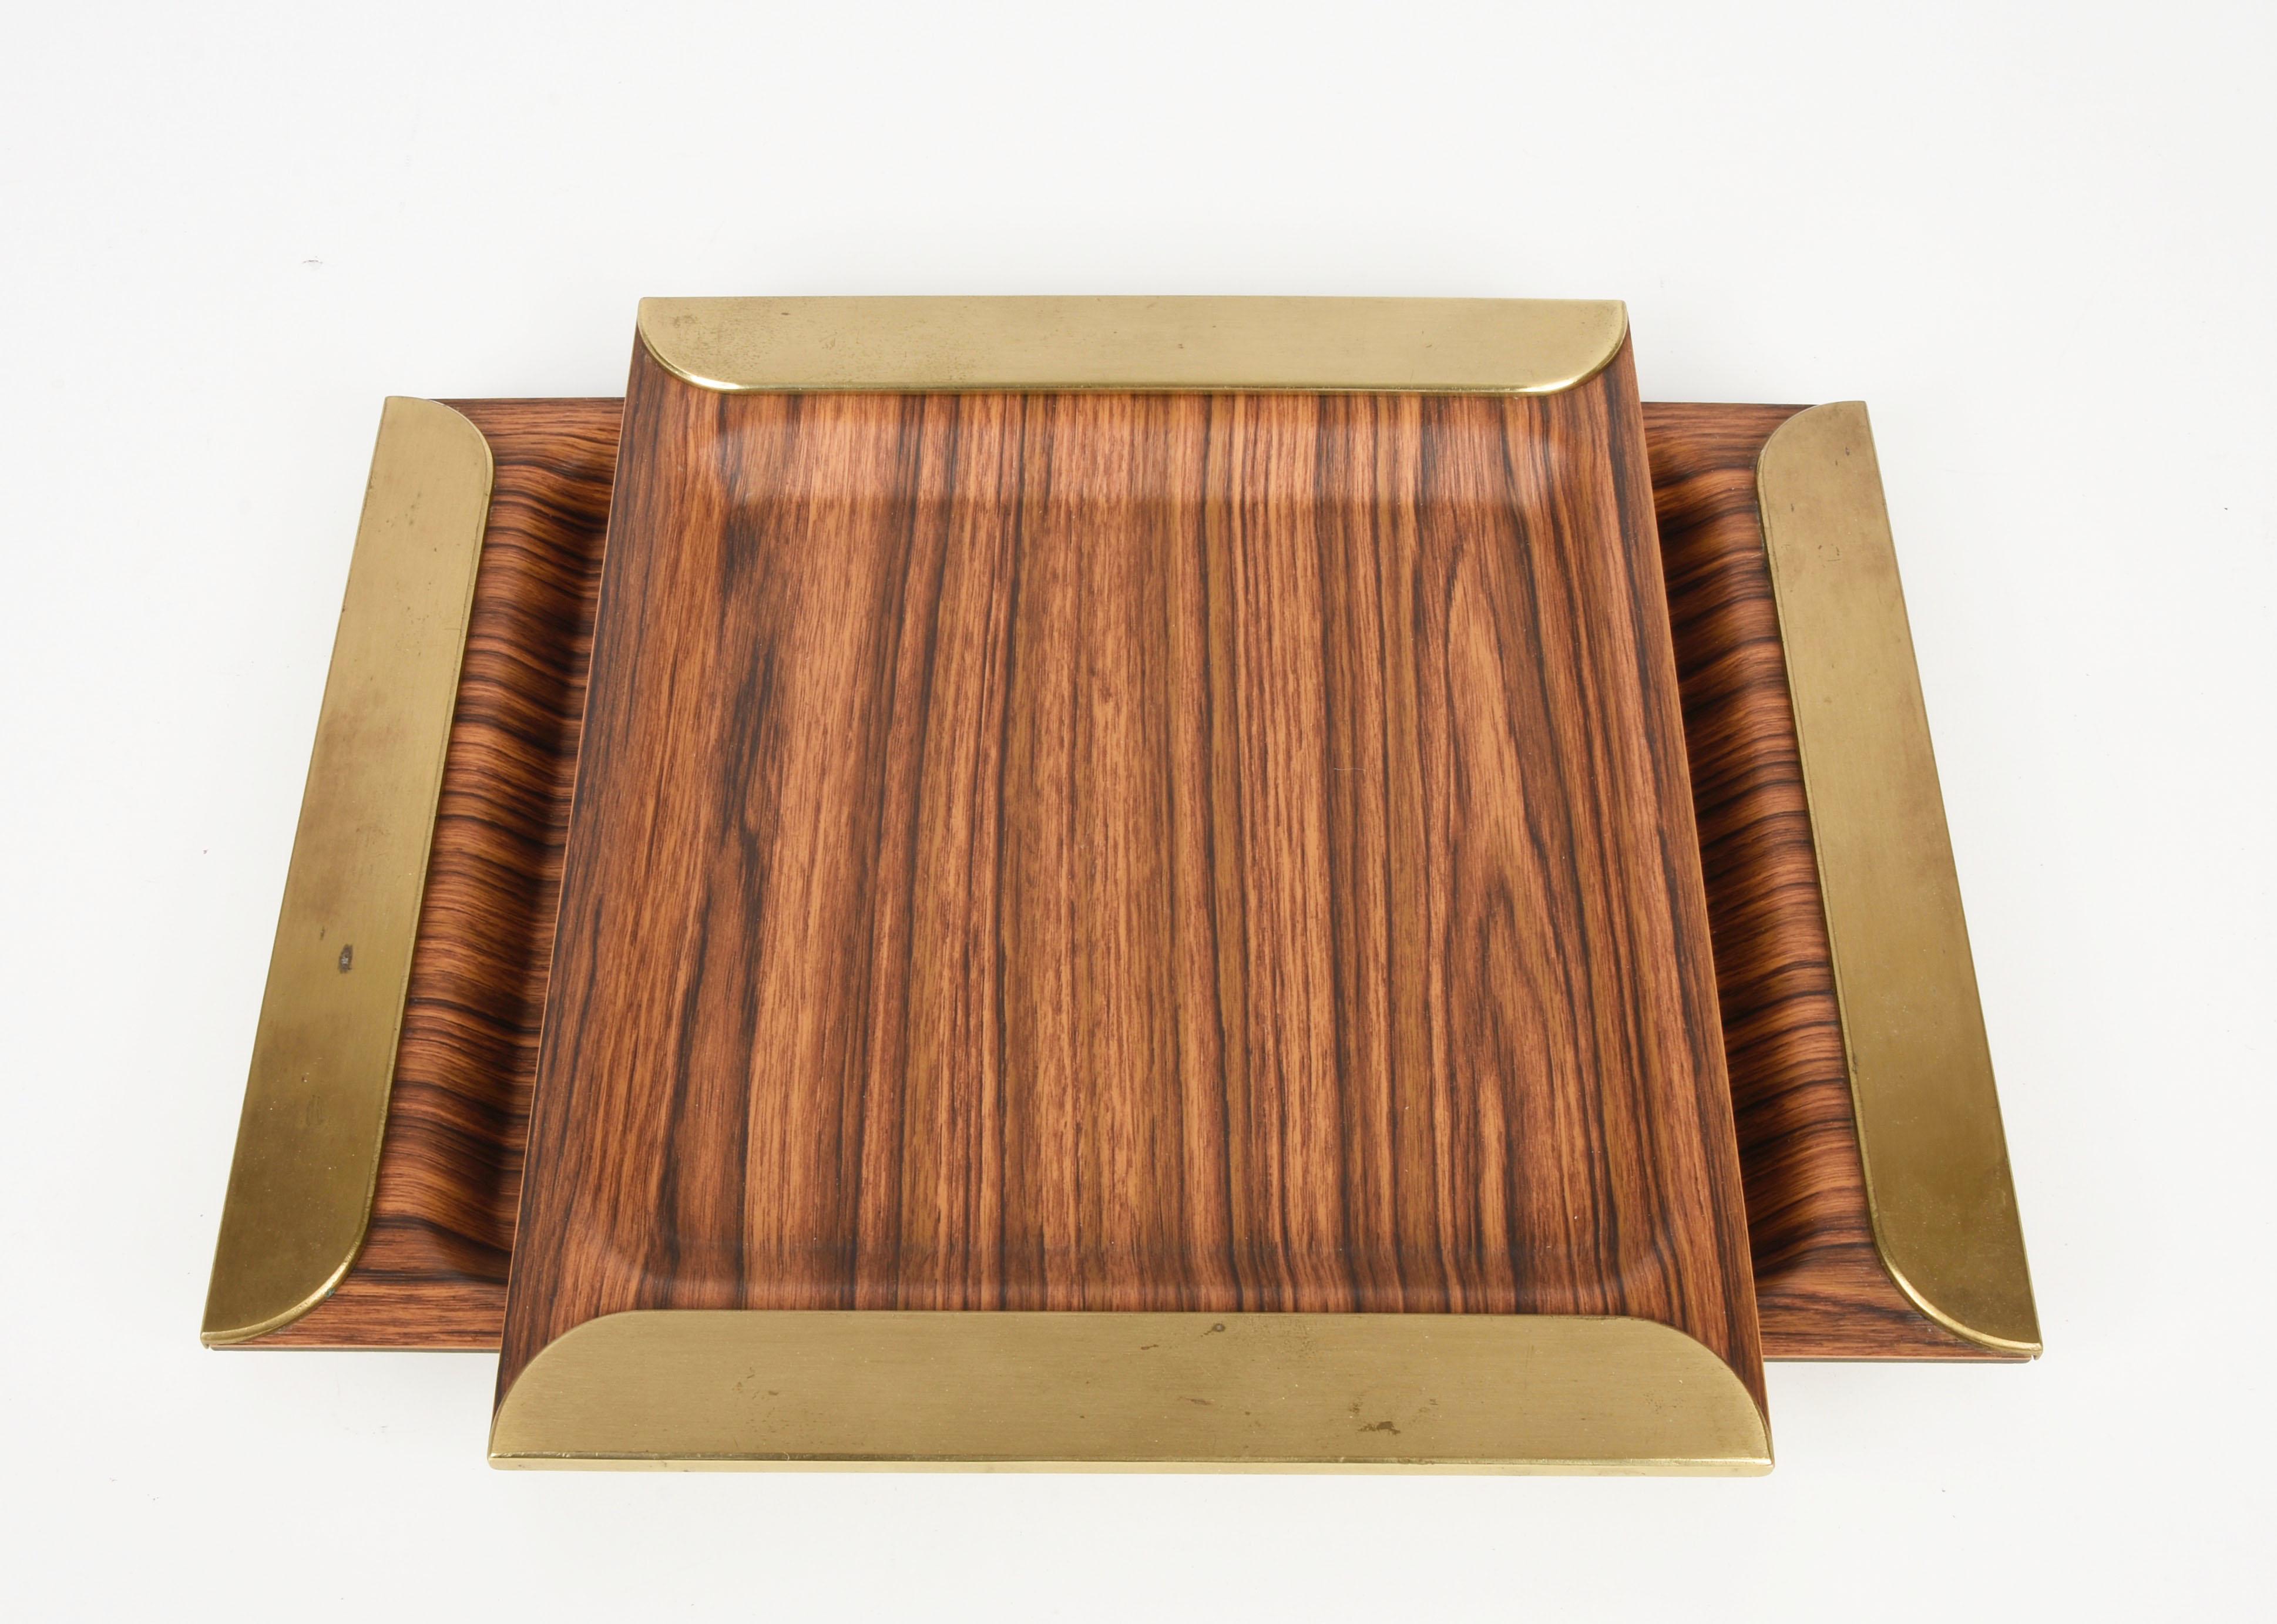  Pair of Midcentury Laminate and Brass Italian Trays Serving Pieces, 1970s For Sale 2